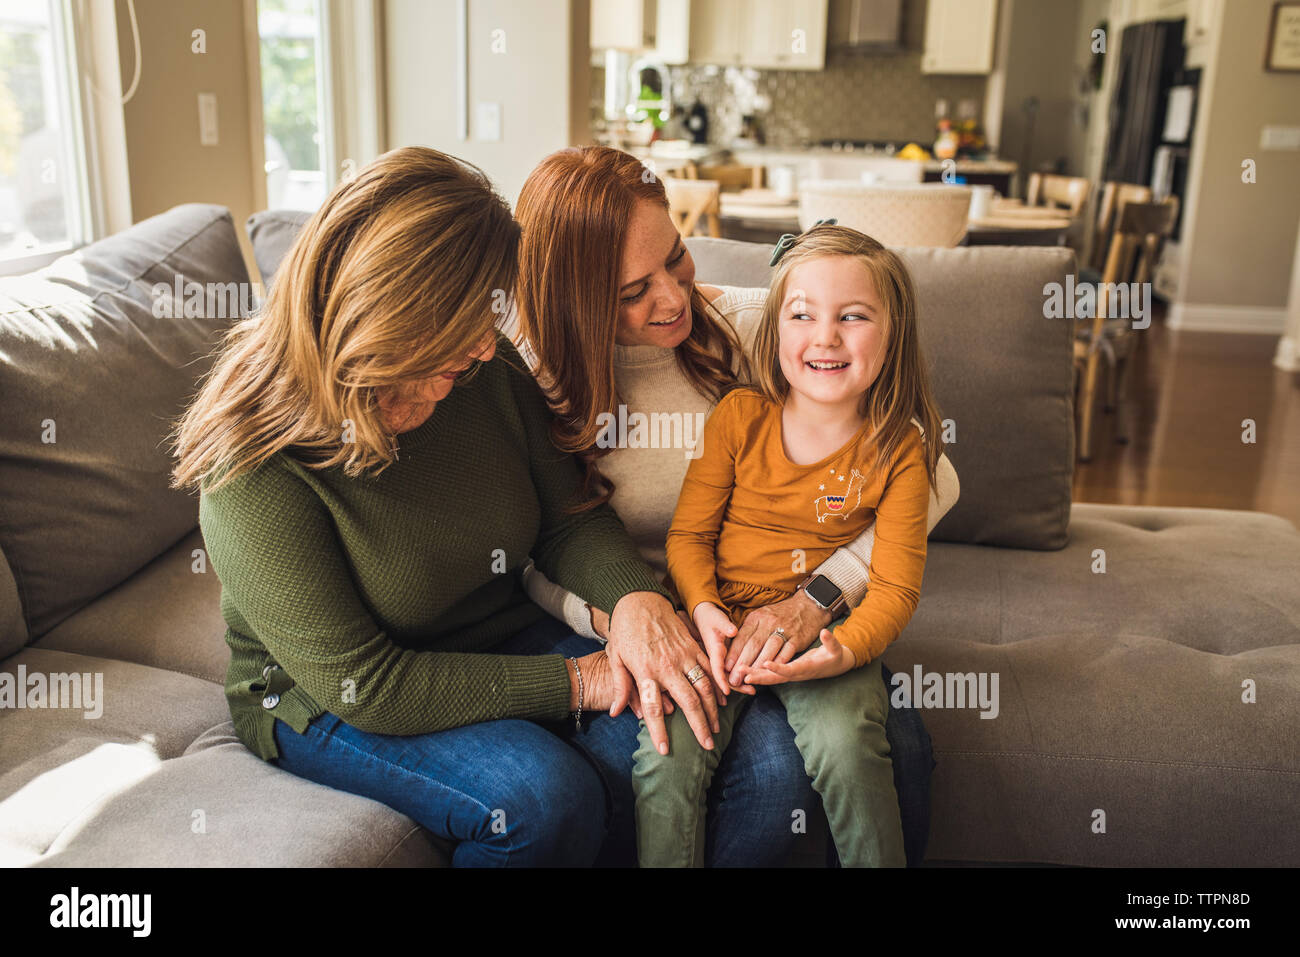 Portrait of three generations of women sitting on living room couch Stock Photo